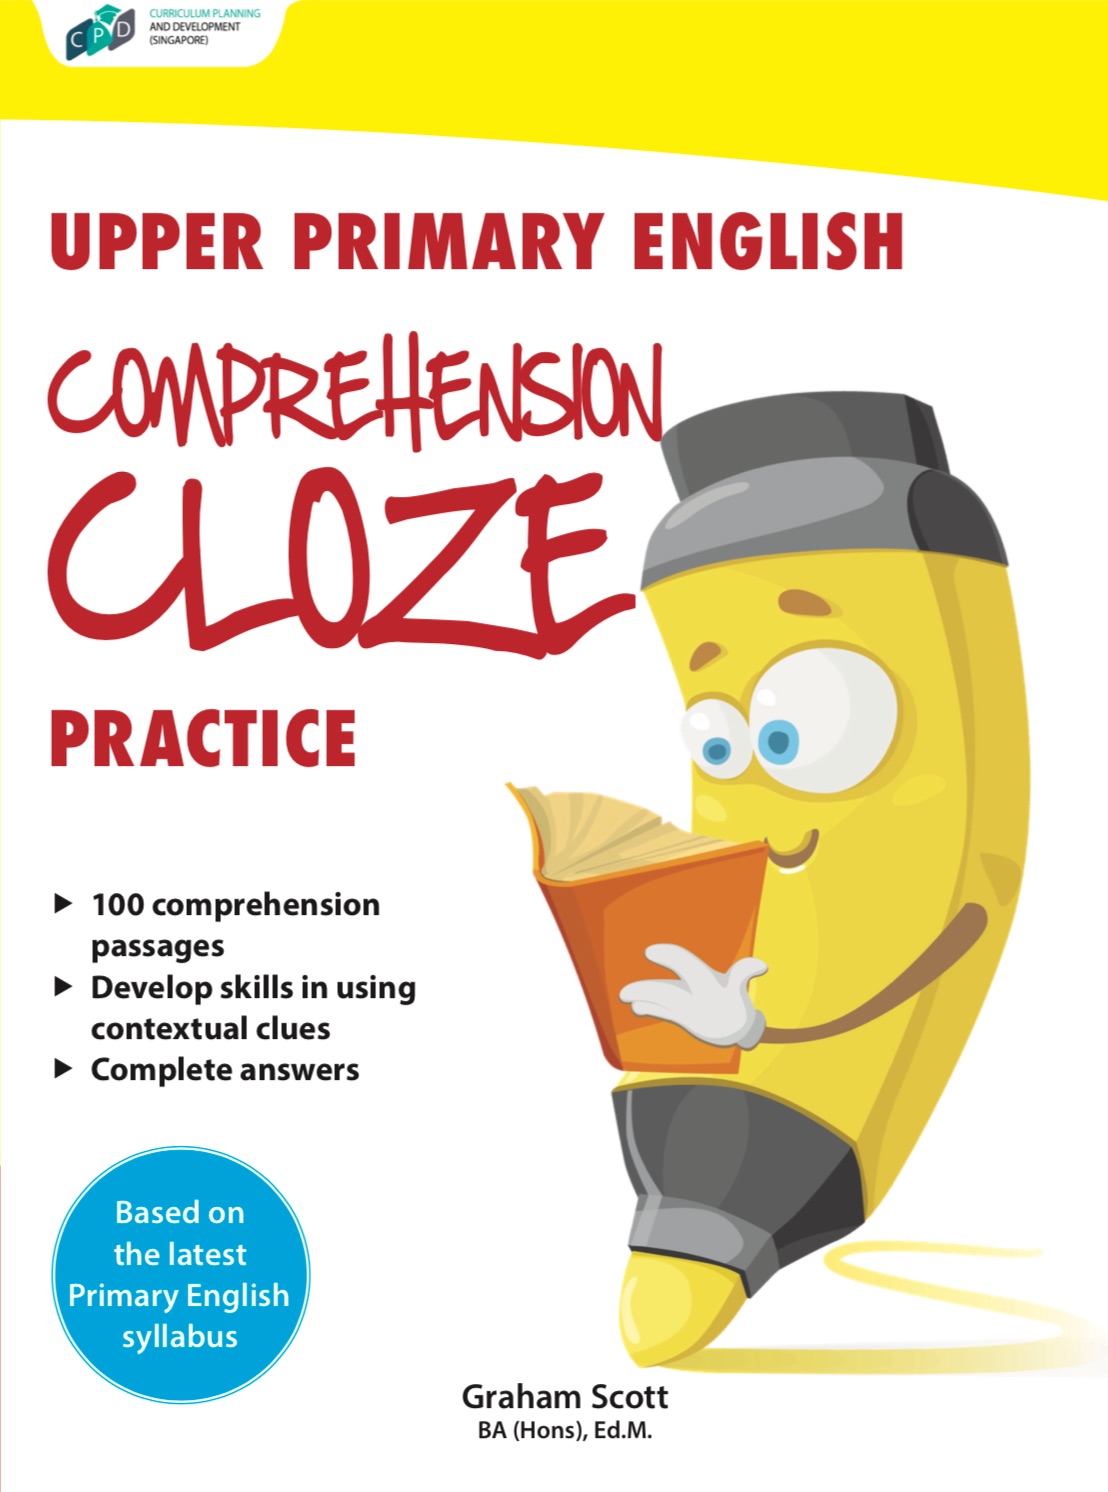 Upper Primary English Comprehension Cloze Practice Cpd Singapore